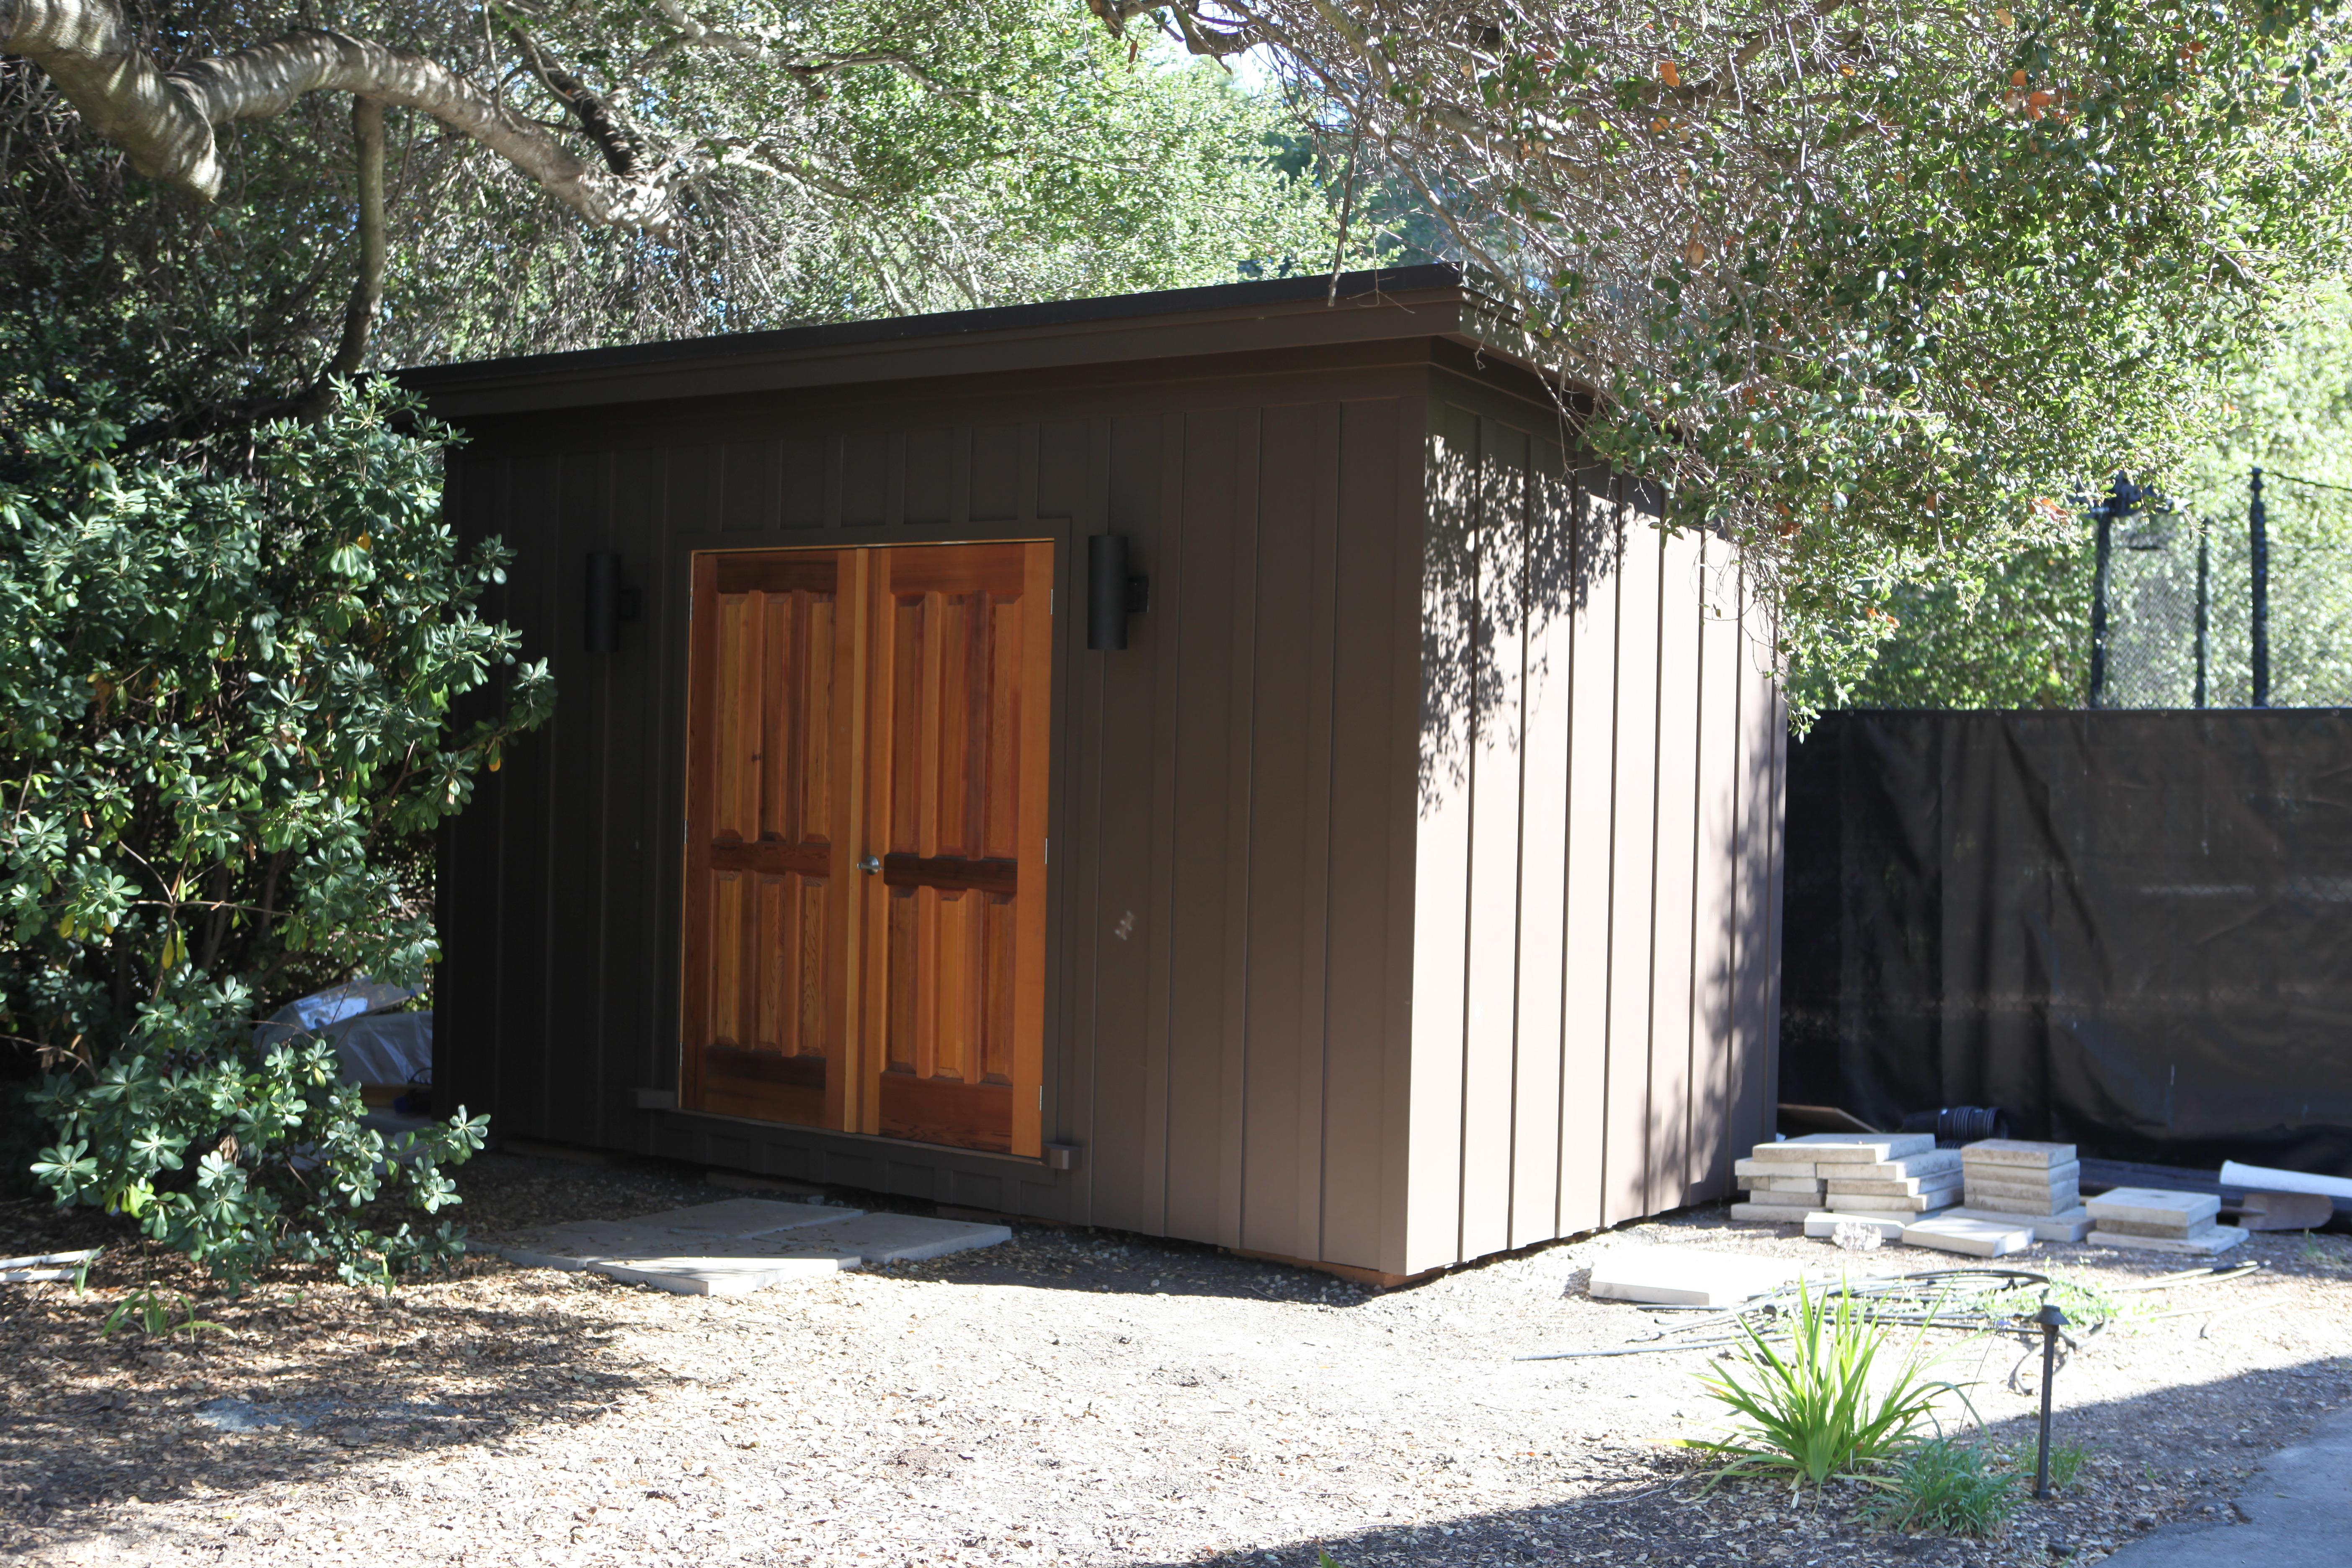 Cedar Urban Studio Shed 8x15 with double doors in Atherton, California. ID number 178526